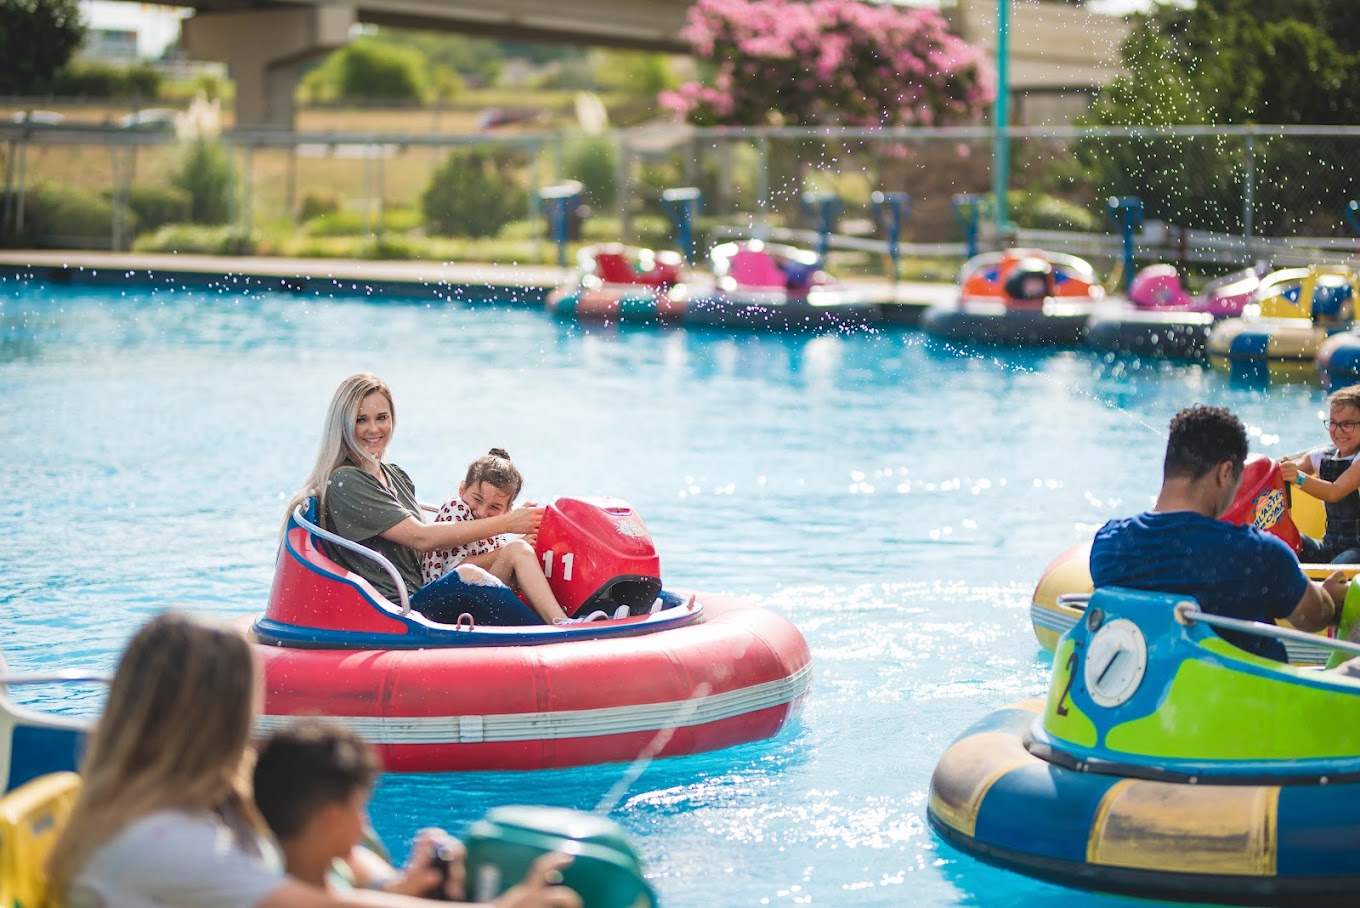 a woman and kids riding an inflatable kart in a pool